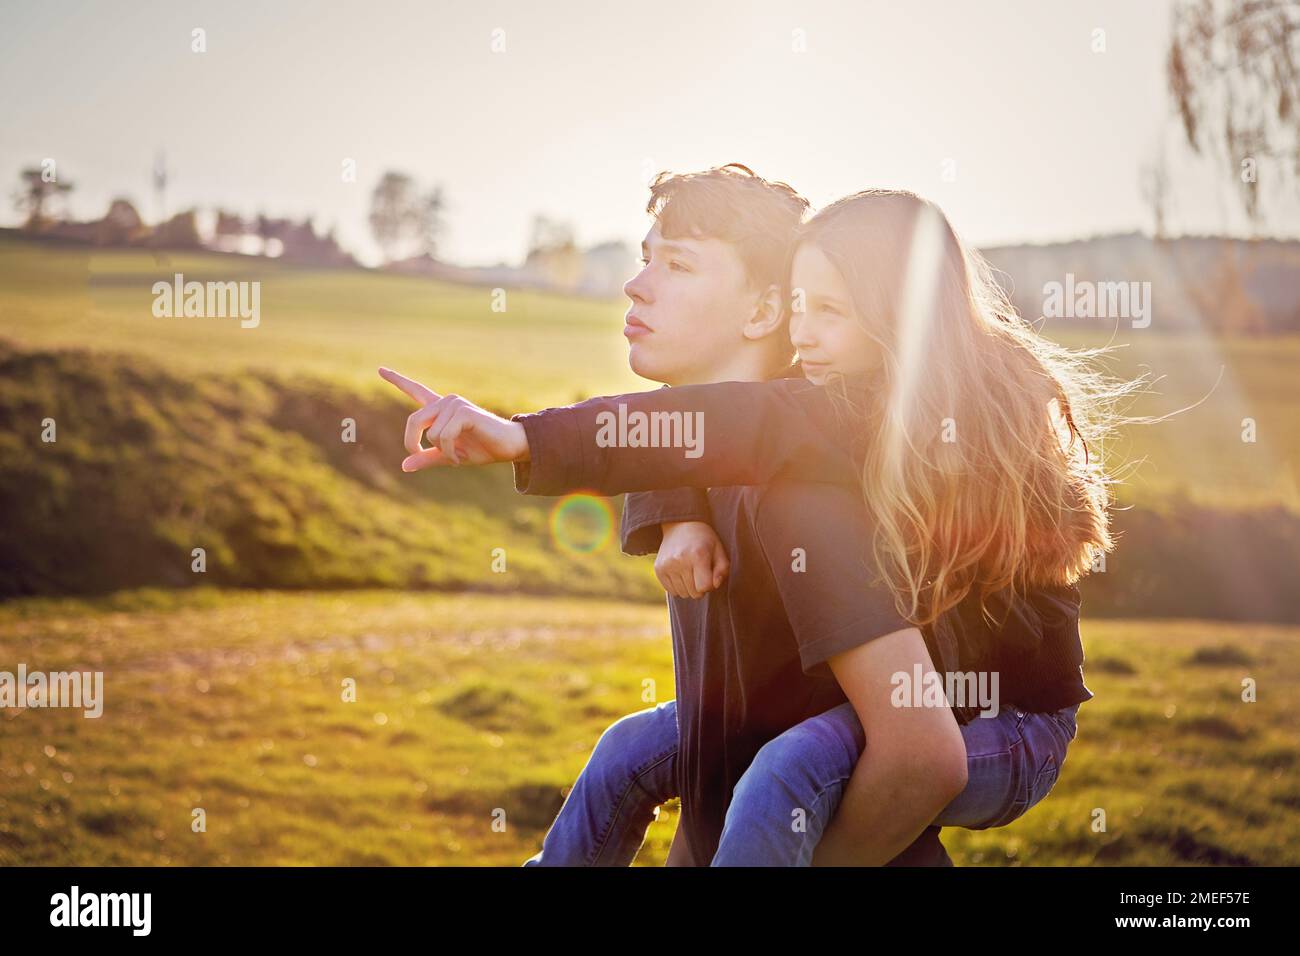 Boy and girl, brother and sister, siblings, interacting on a sunny day, during sunset in nature. Beautiful children sharing family moments outdoors Stock Photo